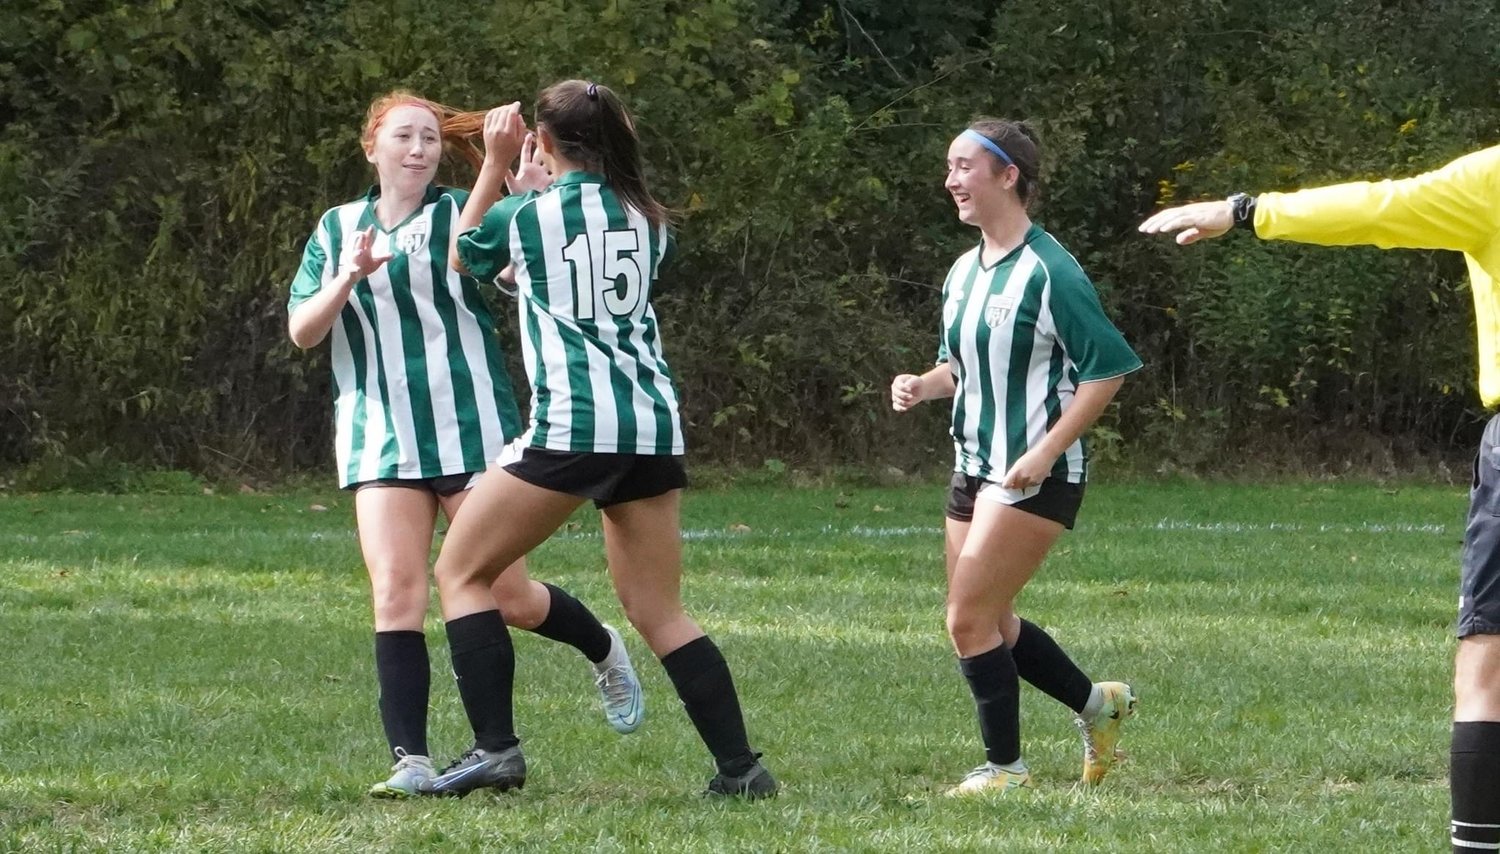 Gabby Meszaros, No. 15, scores a goal to open the Beekman Cup tournament before celebrating with teammates Avery Whitehouse and Kailey Dunne.